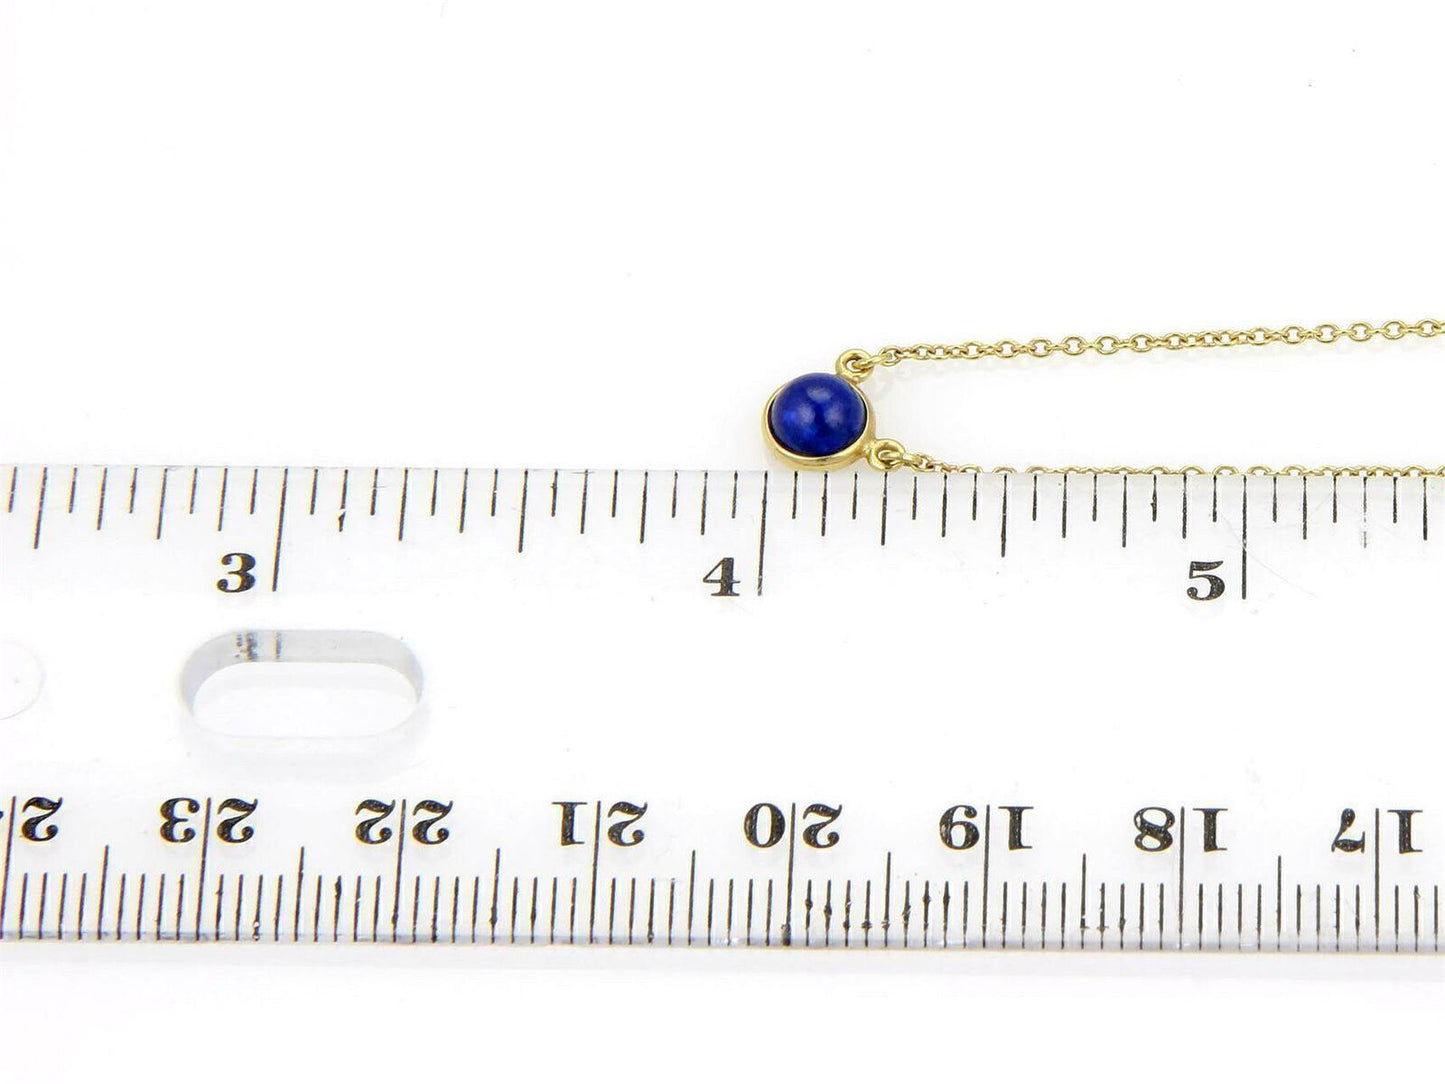 Tiffany & Co. Peretti Lapis by The Yard 18k Yellow Gold Necklace